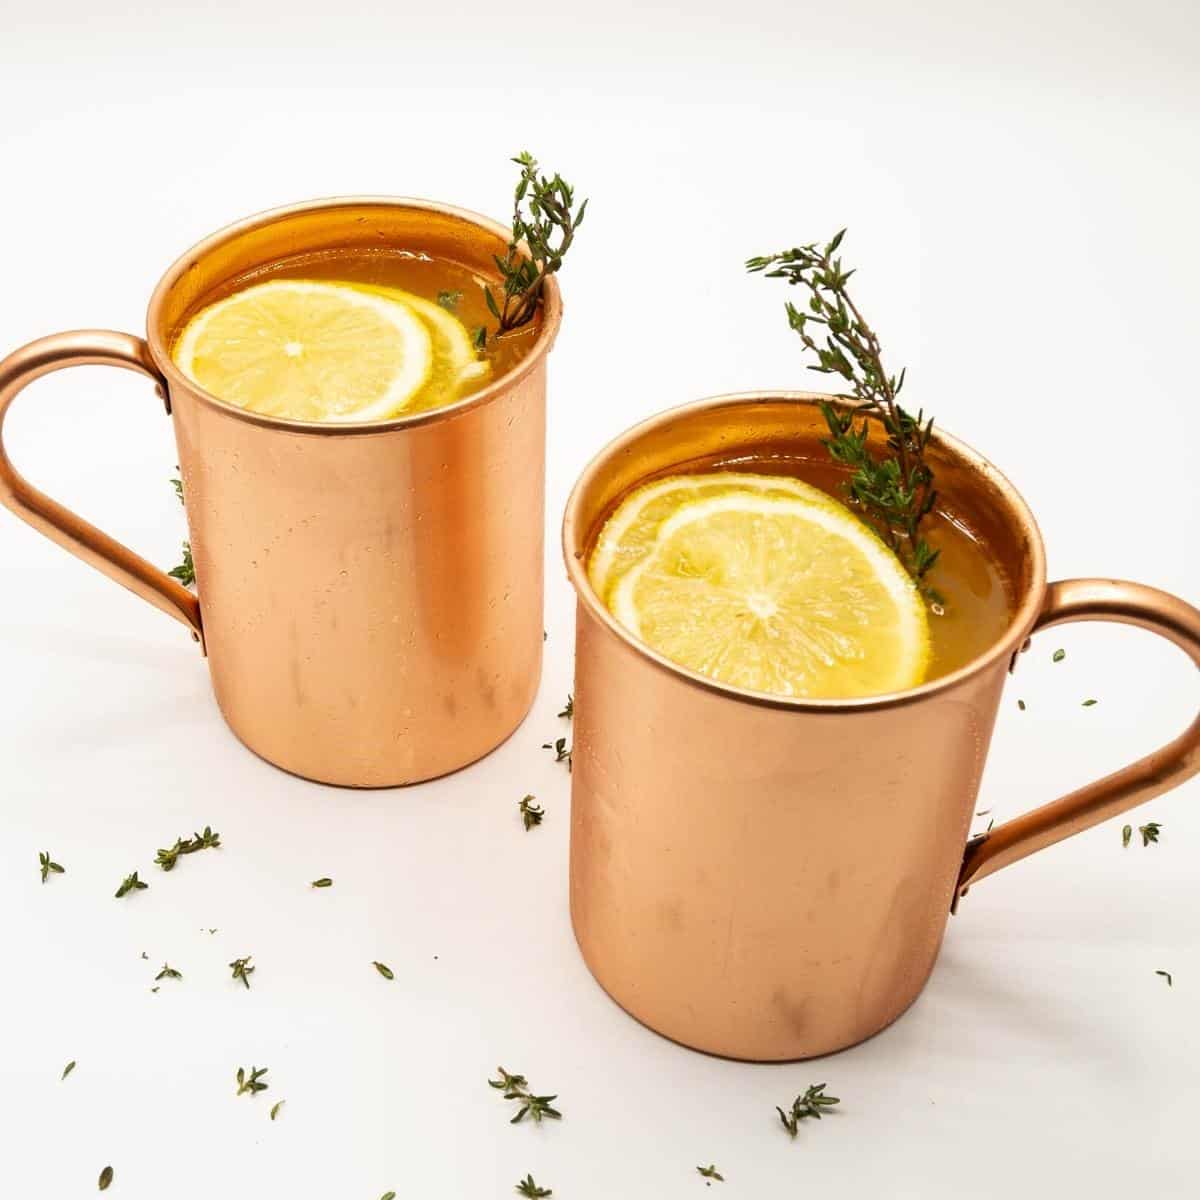 How to Make a Moscow Mule in 5 Minutes Flat - Veena Azmanov